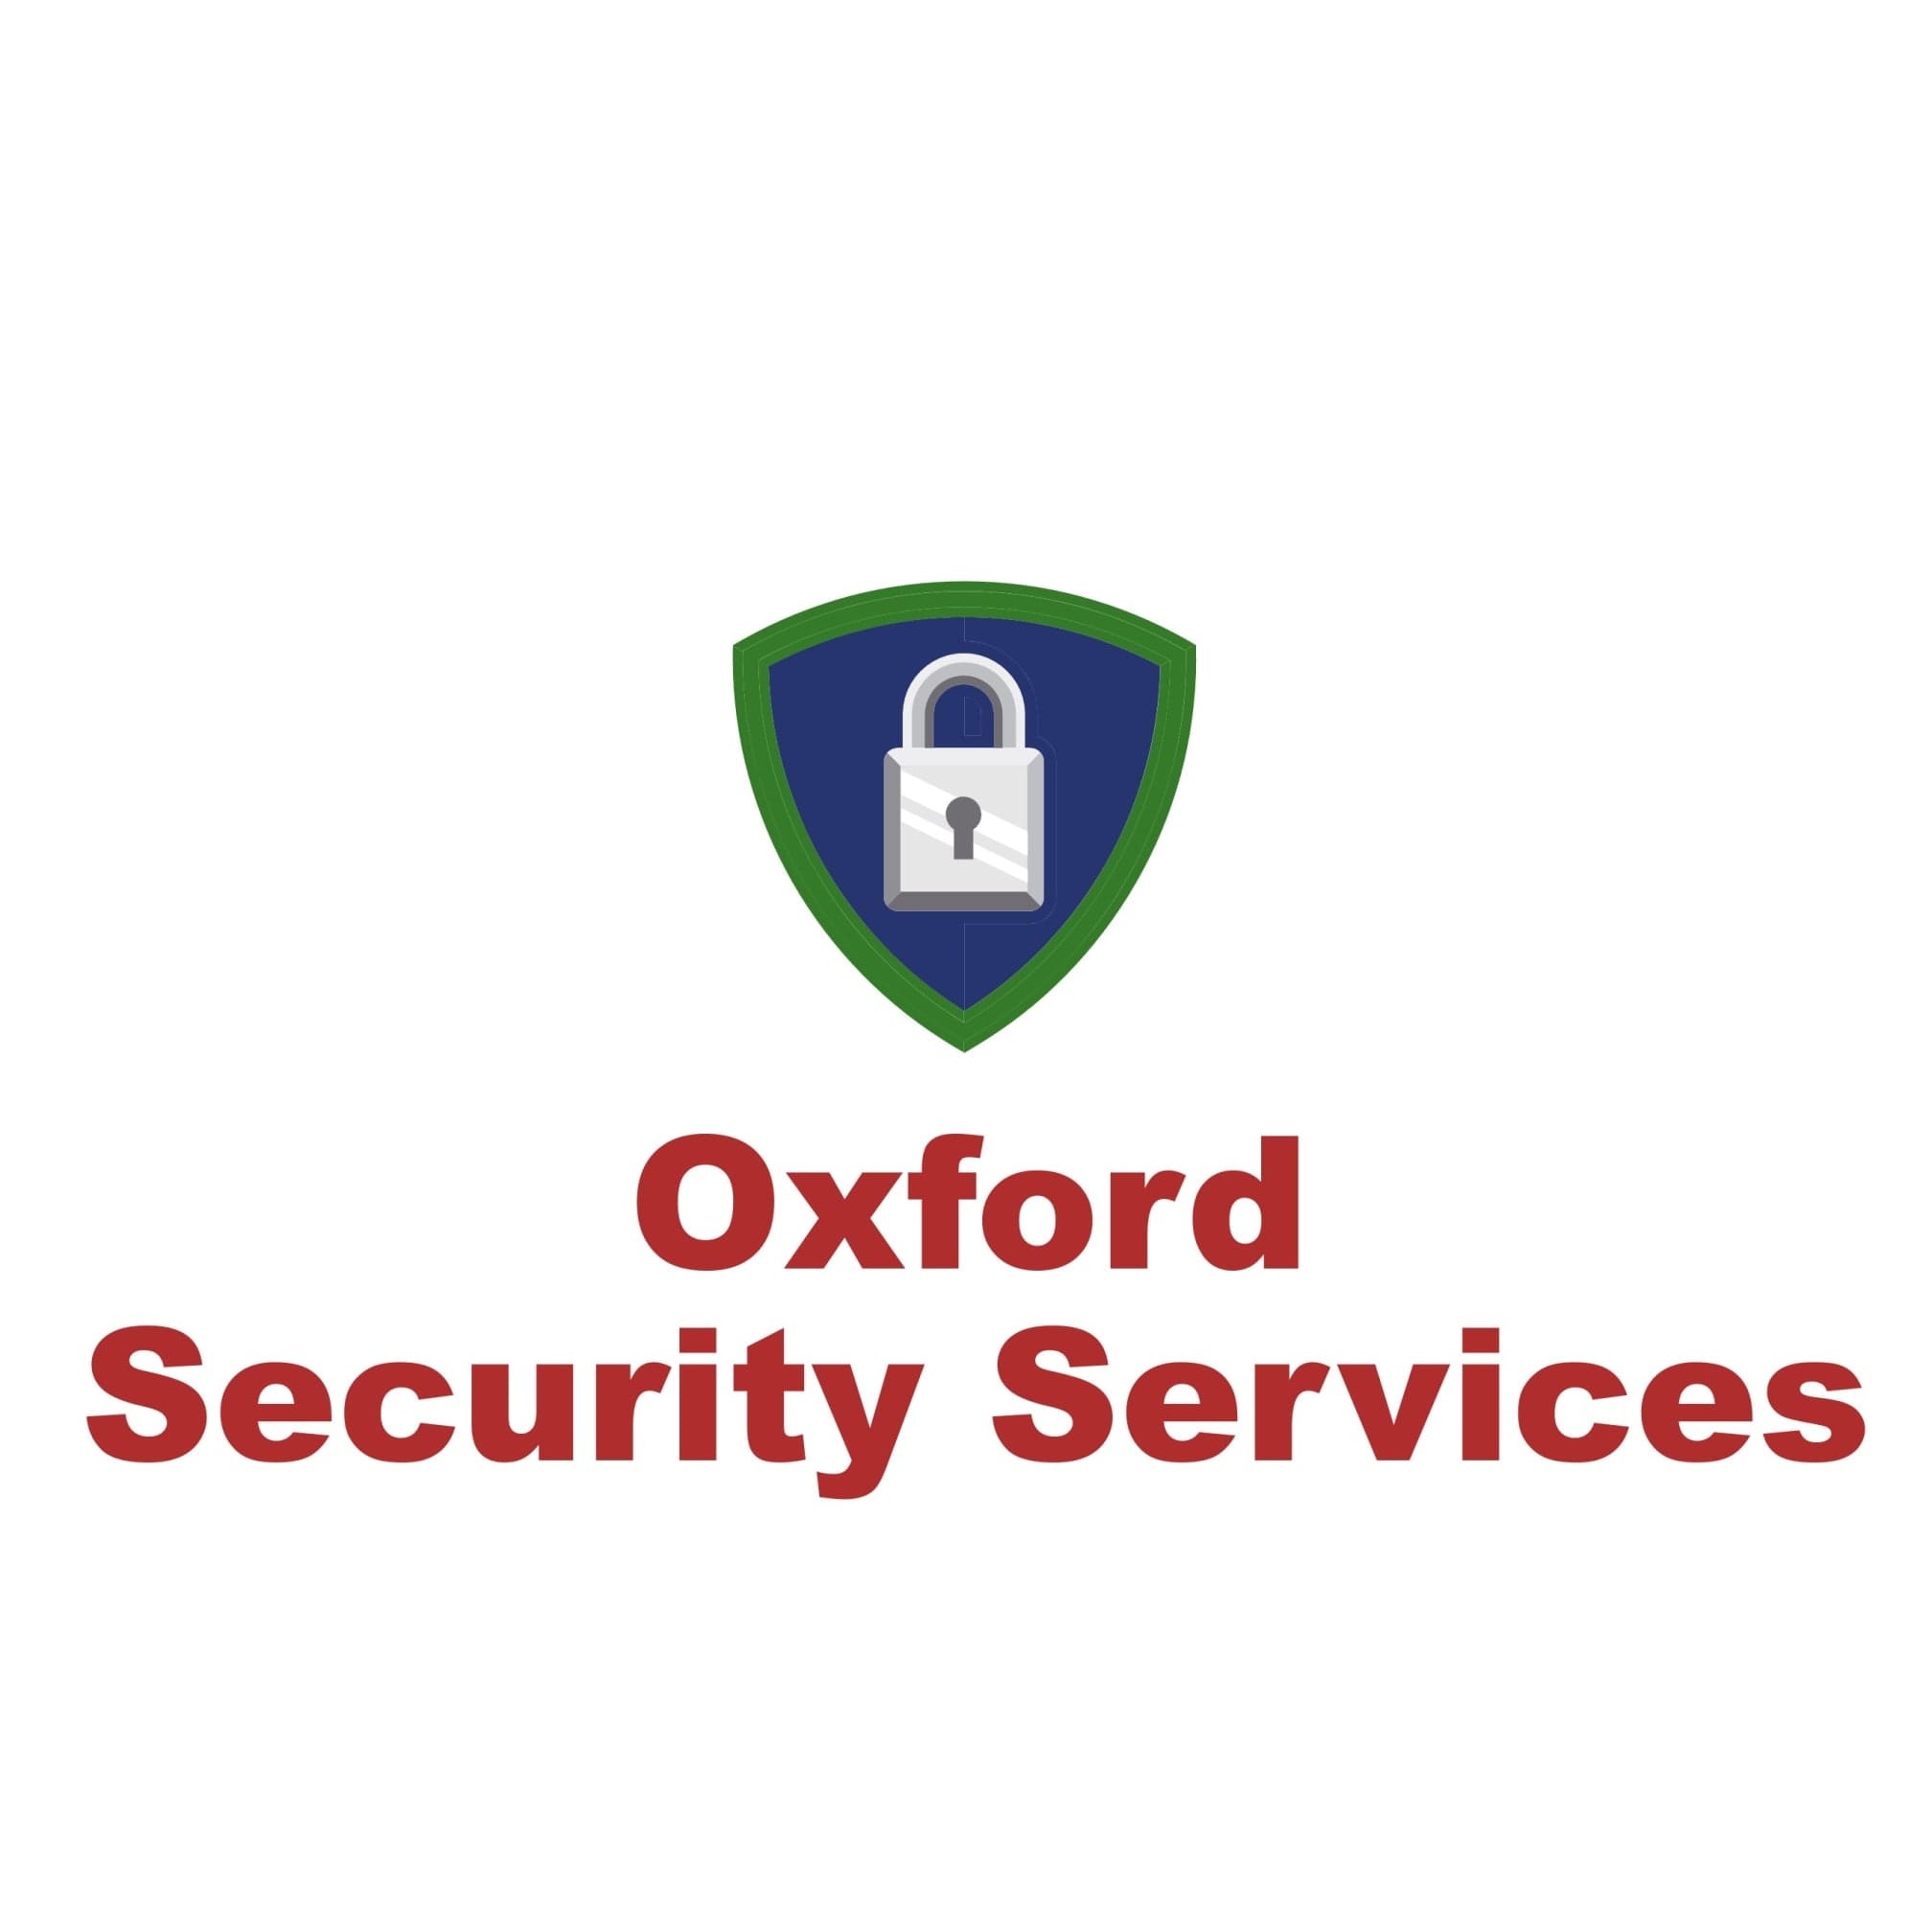 Oxford Security Services - Oxford, Oxfordshire OX4 6LB - 01865 751605 | ShowMeLocal.com